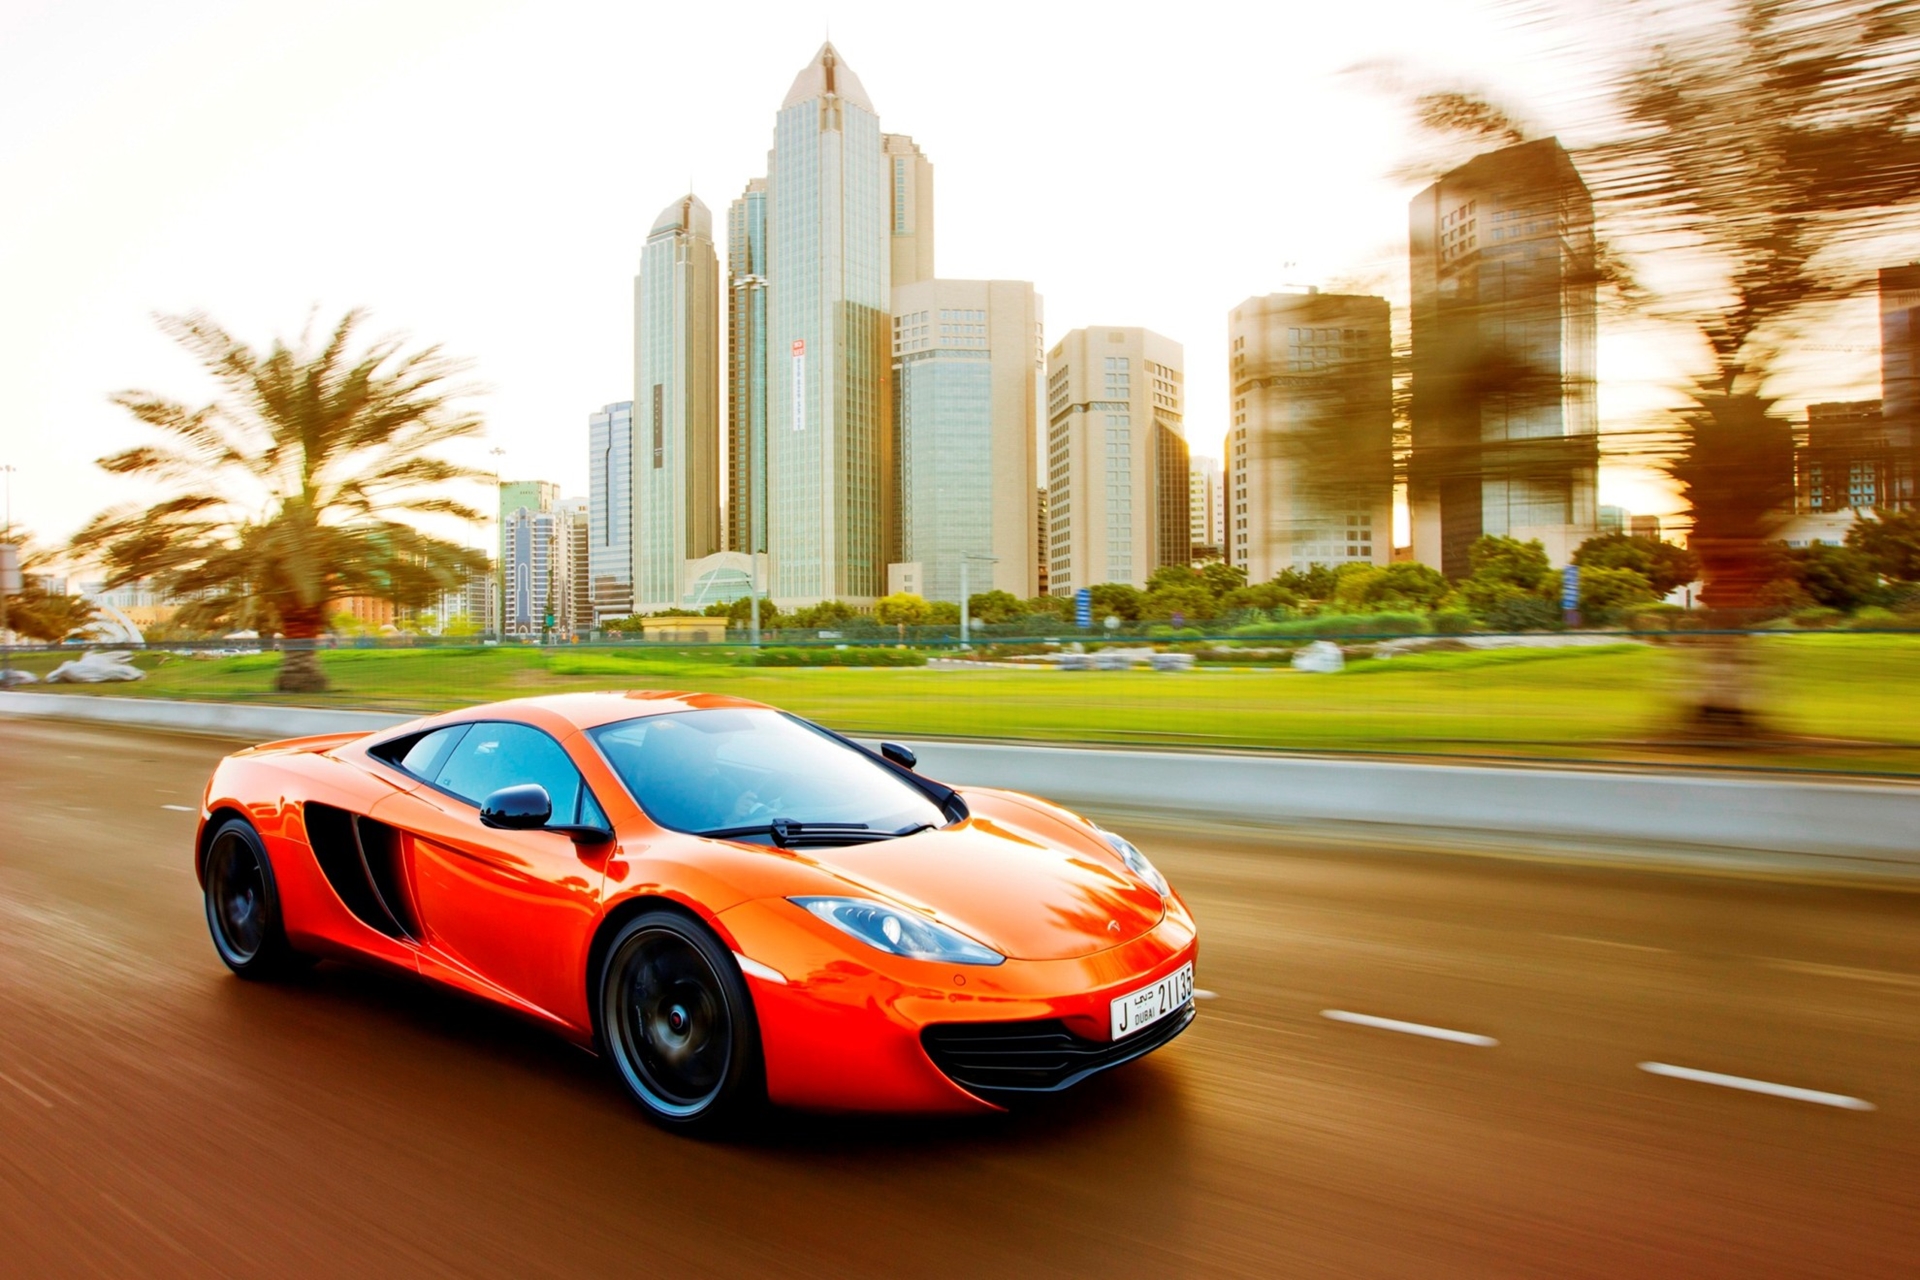 MCLAREN 12C NAMED MIDDLE EAST CAR OF THE YEAR